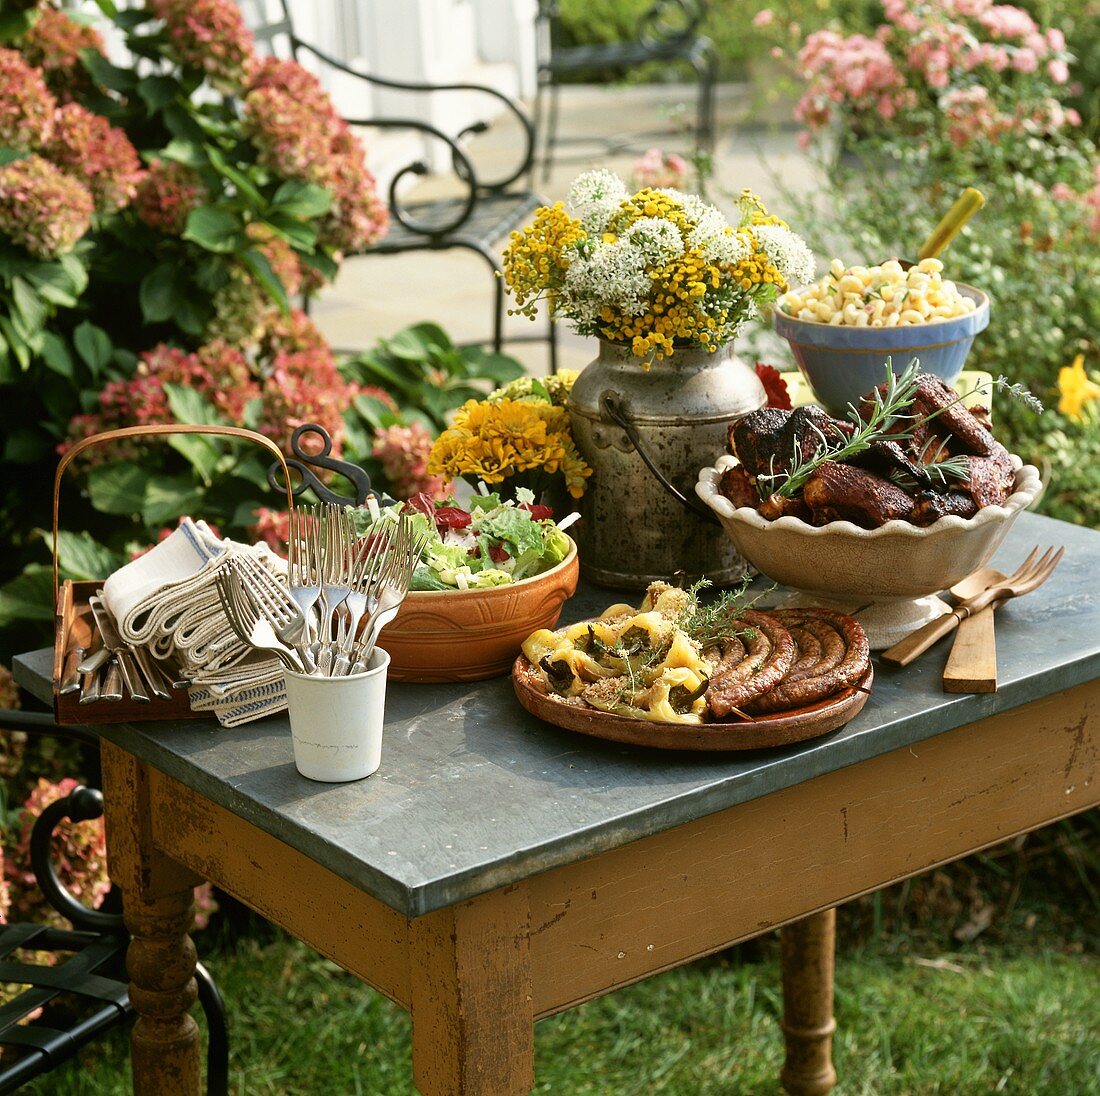 Buffet of grilled food and salads on garden table